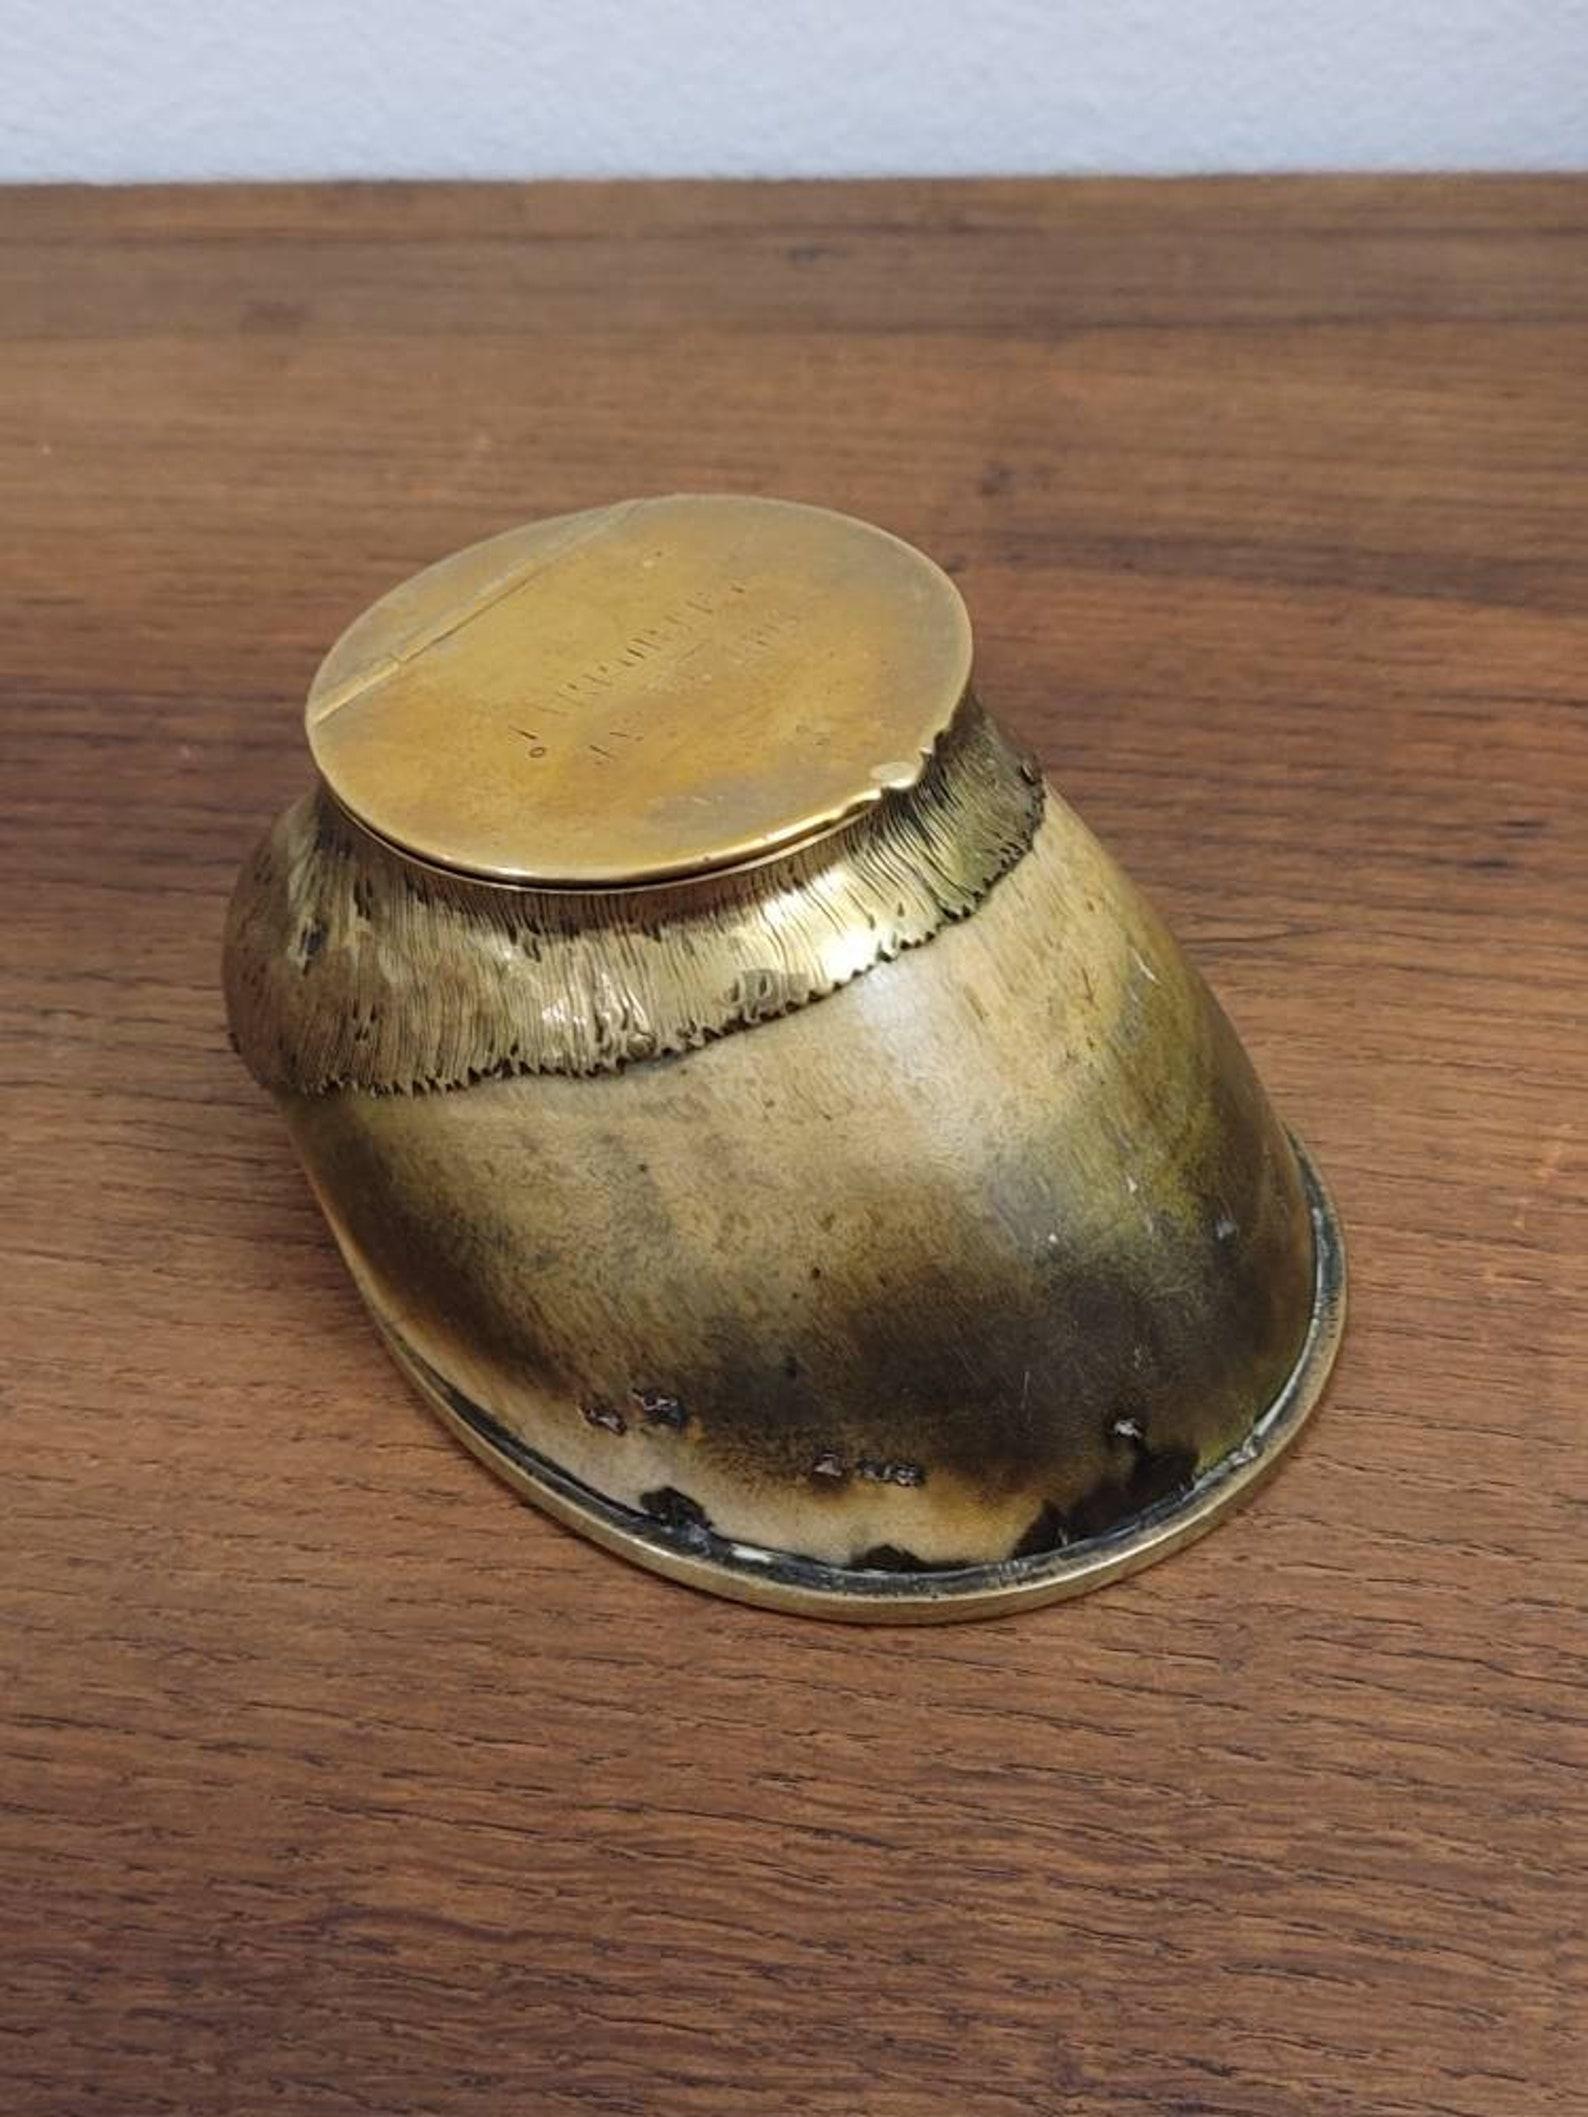 A rare and important late 19th century Victorian era metal mounted horse hoof match holder by Rowland Ward.

Museum quality example, this most unusual curiosity having a gilt brass hinged lid opening to striker and open receptacle. Signed 